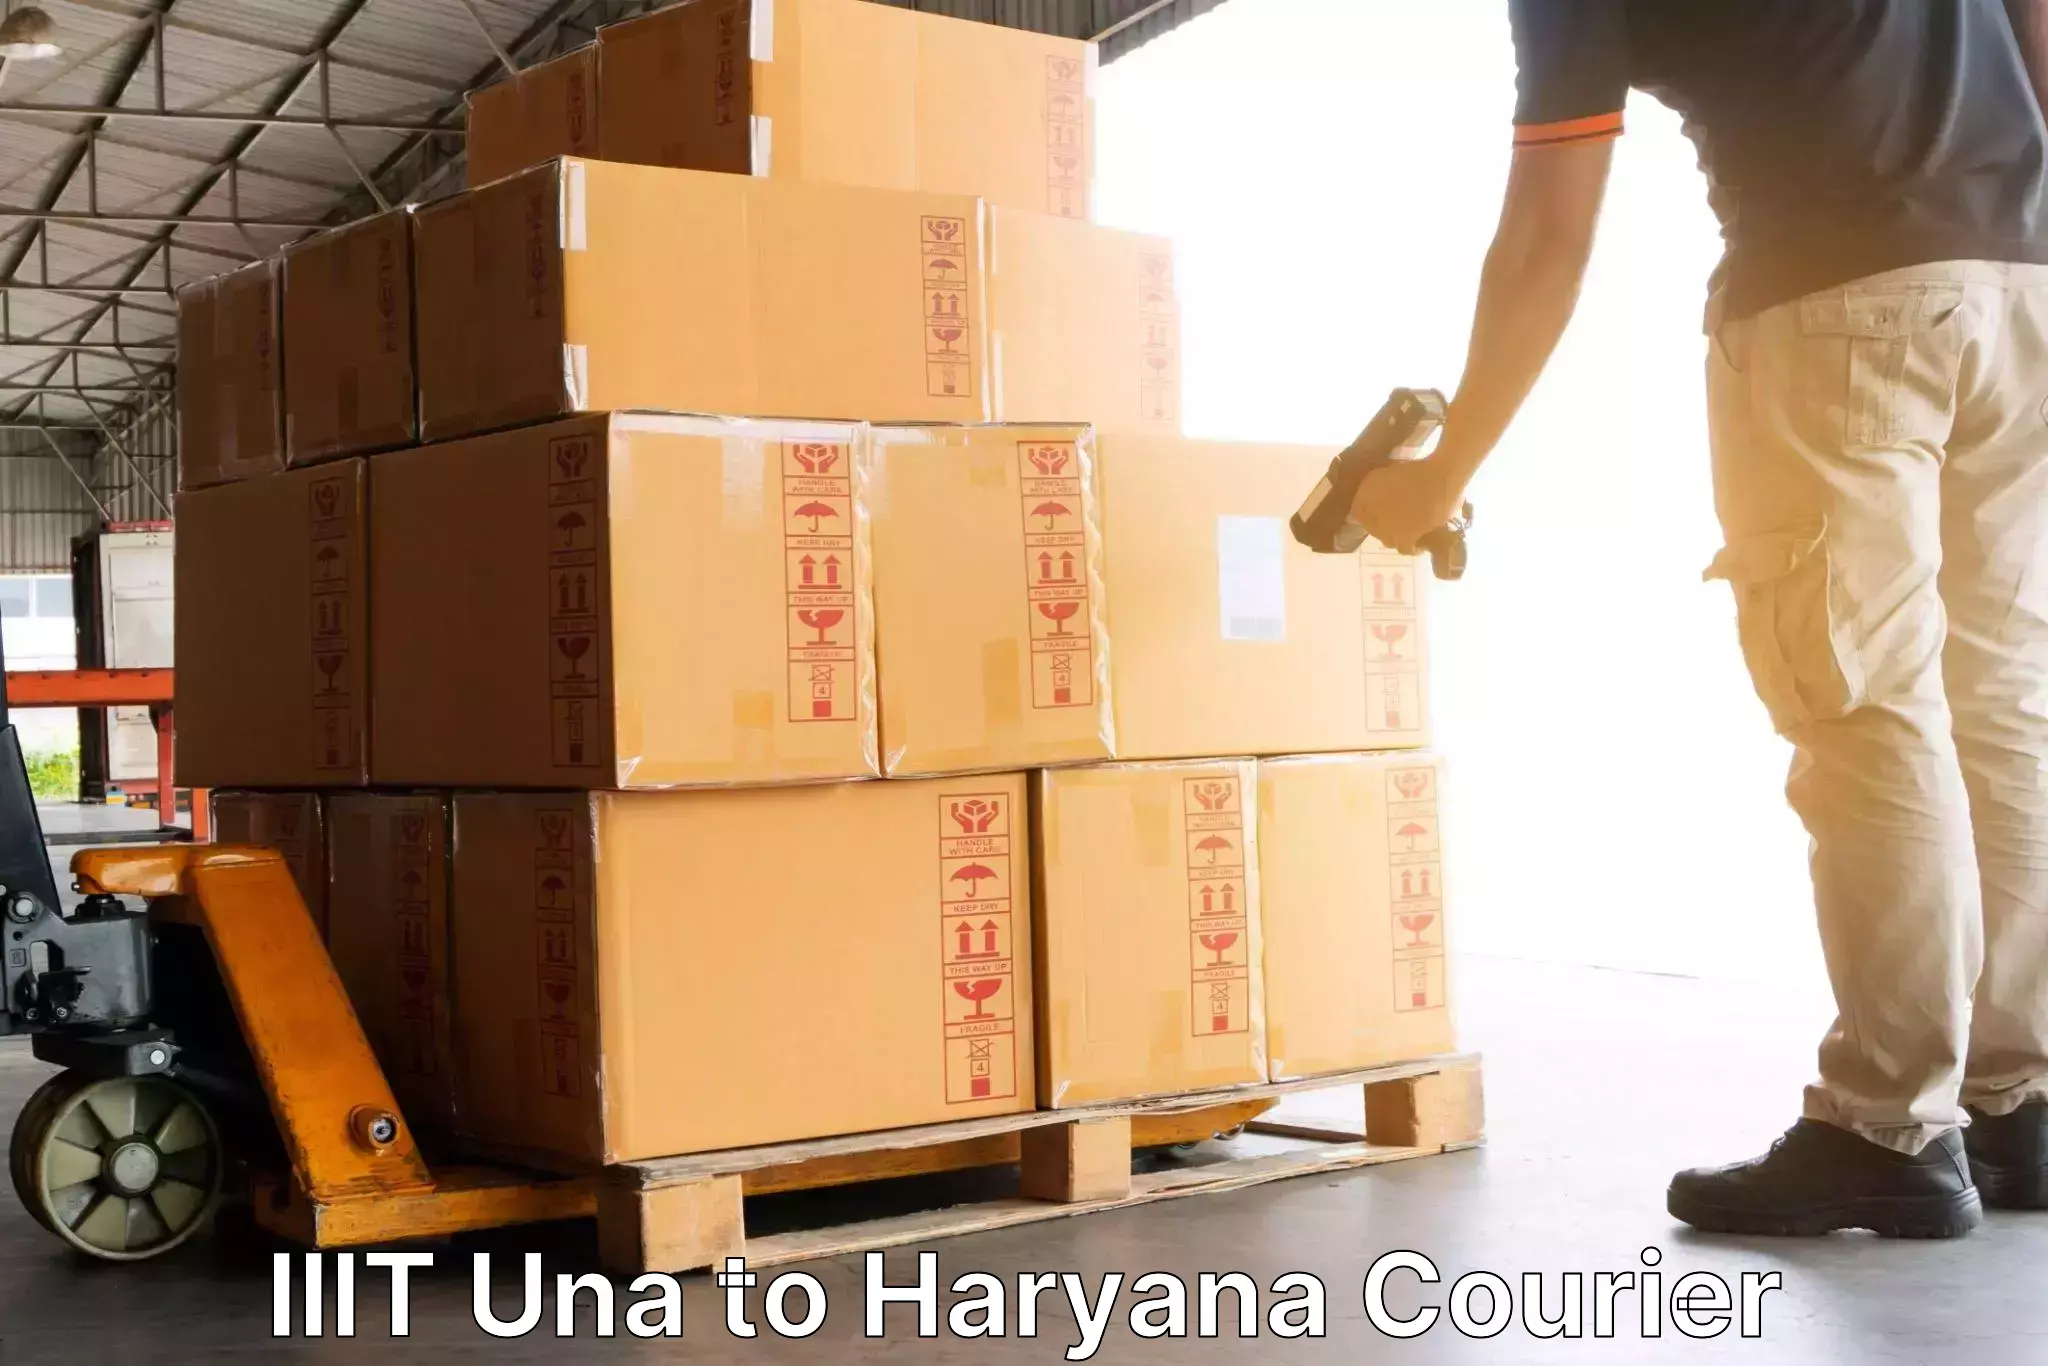 On-call courier service IIIT Una to Chirya